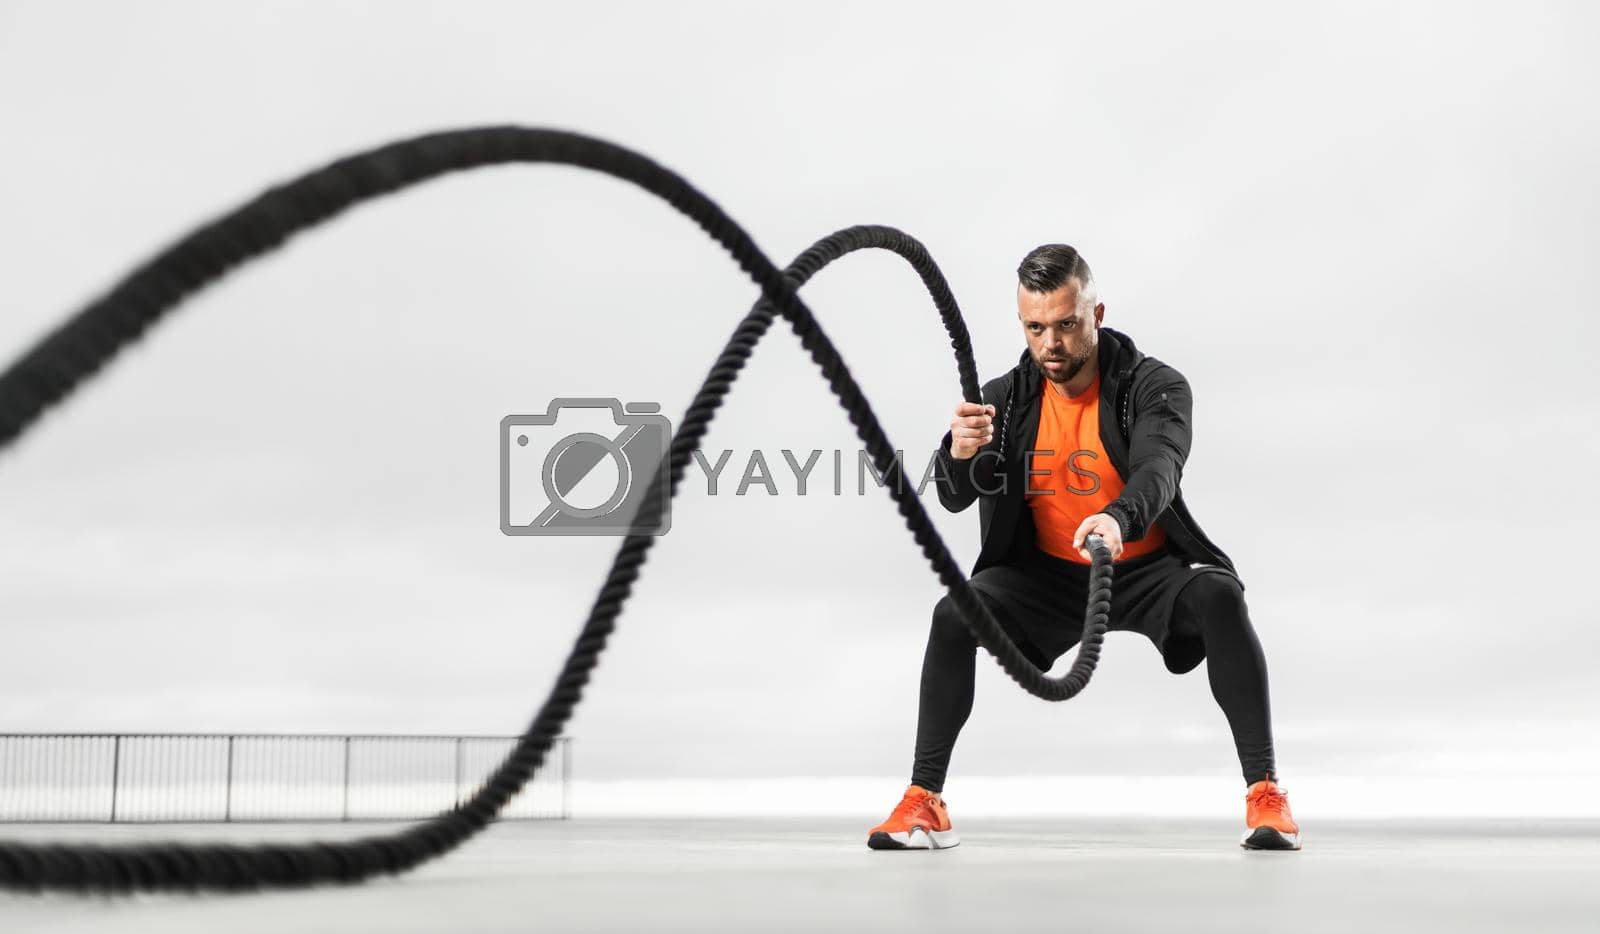 Royalty free image of Fat burning battle rope workout. Athletic man doing sports exercises on the ocean beach by MikeOrlov